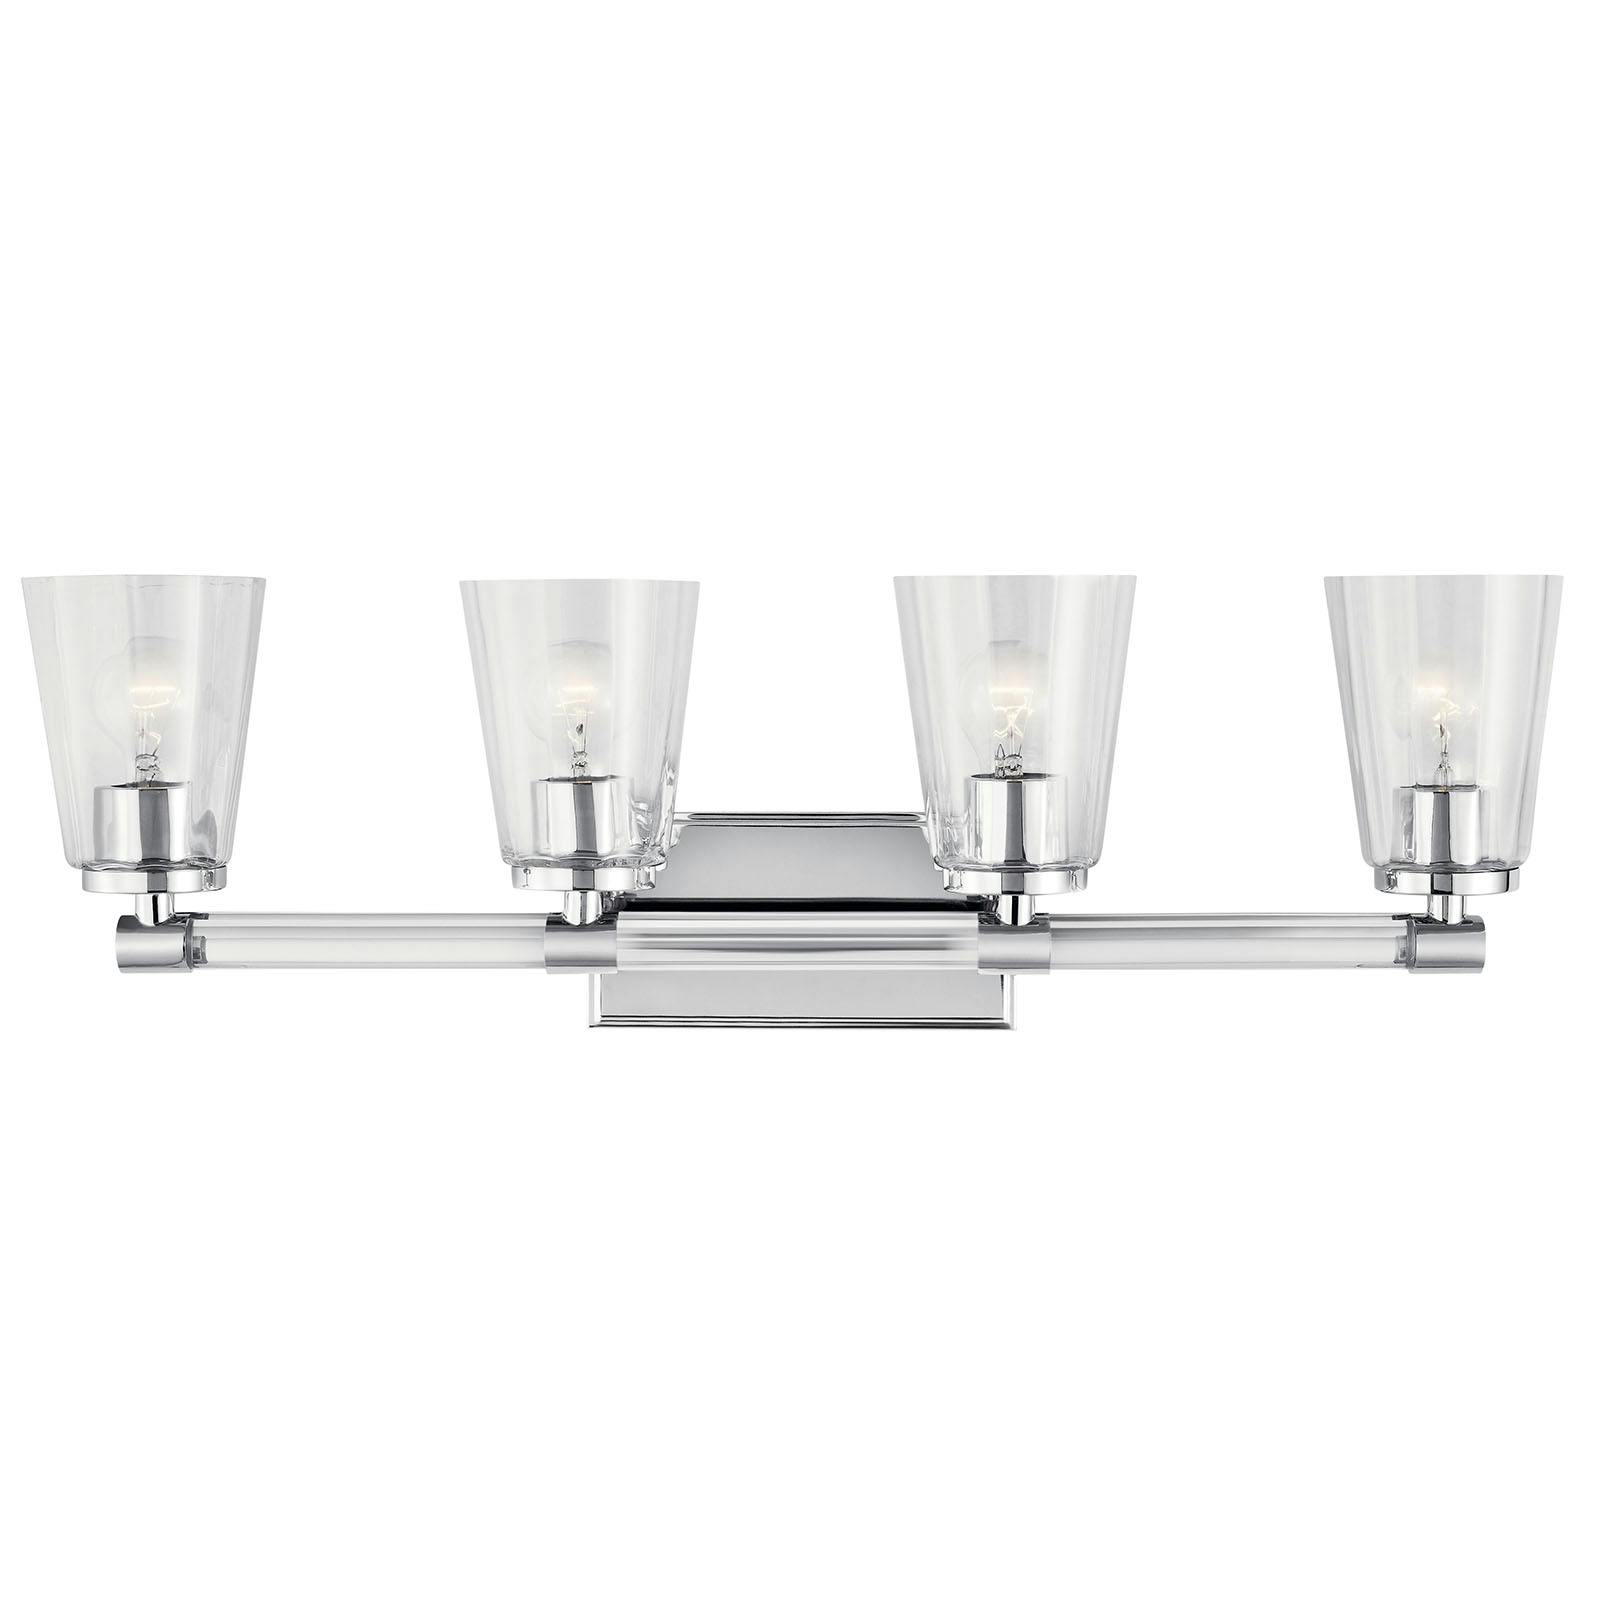 The Audrea™ 4 Light Vanity Light Chrome facing up on a white background